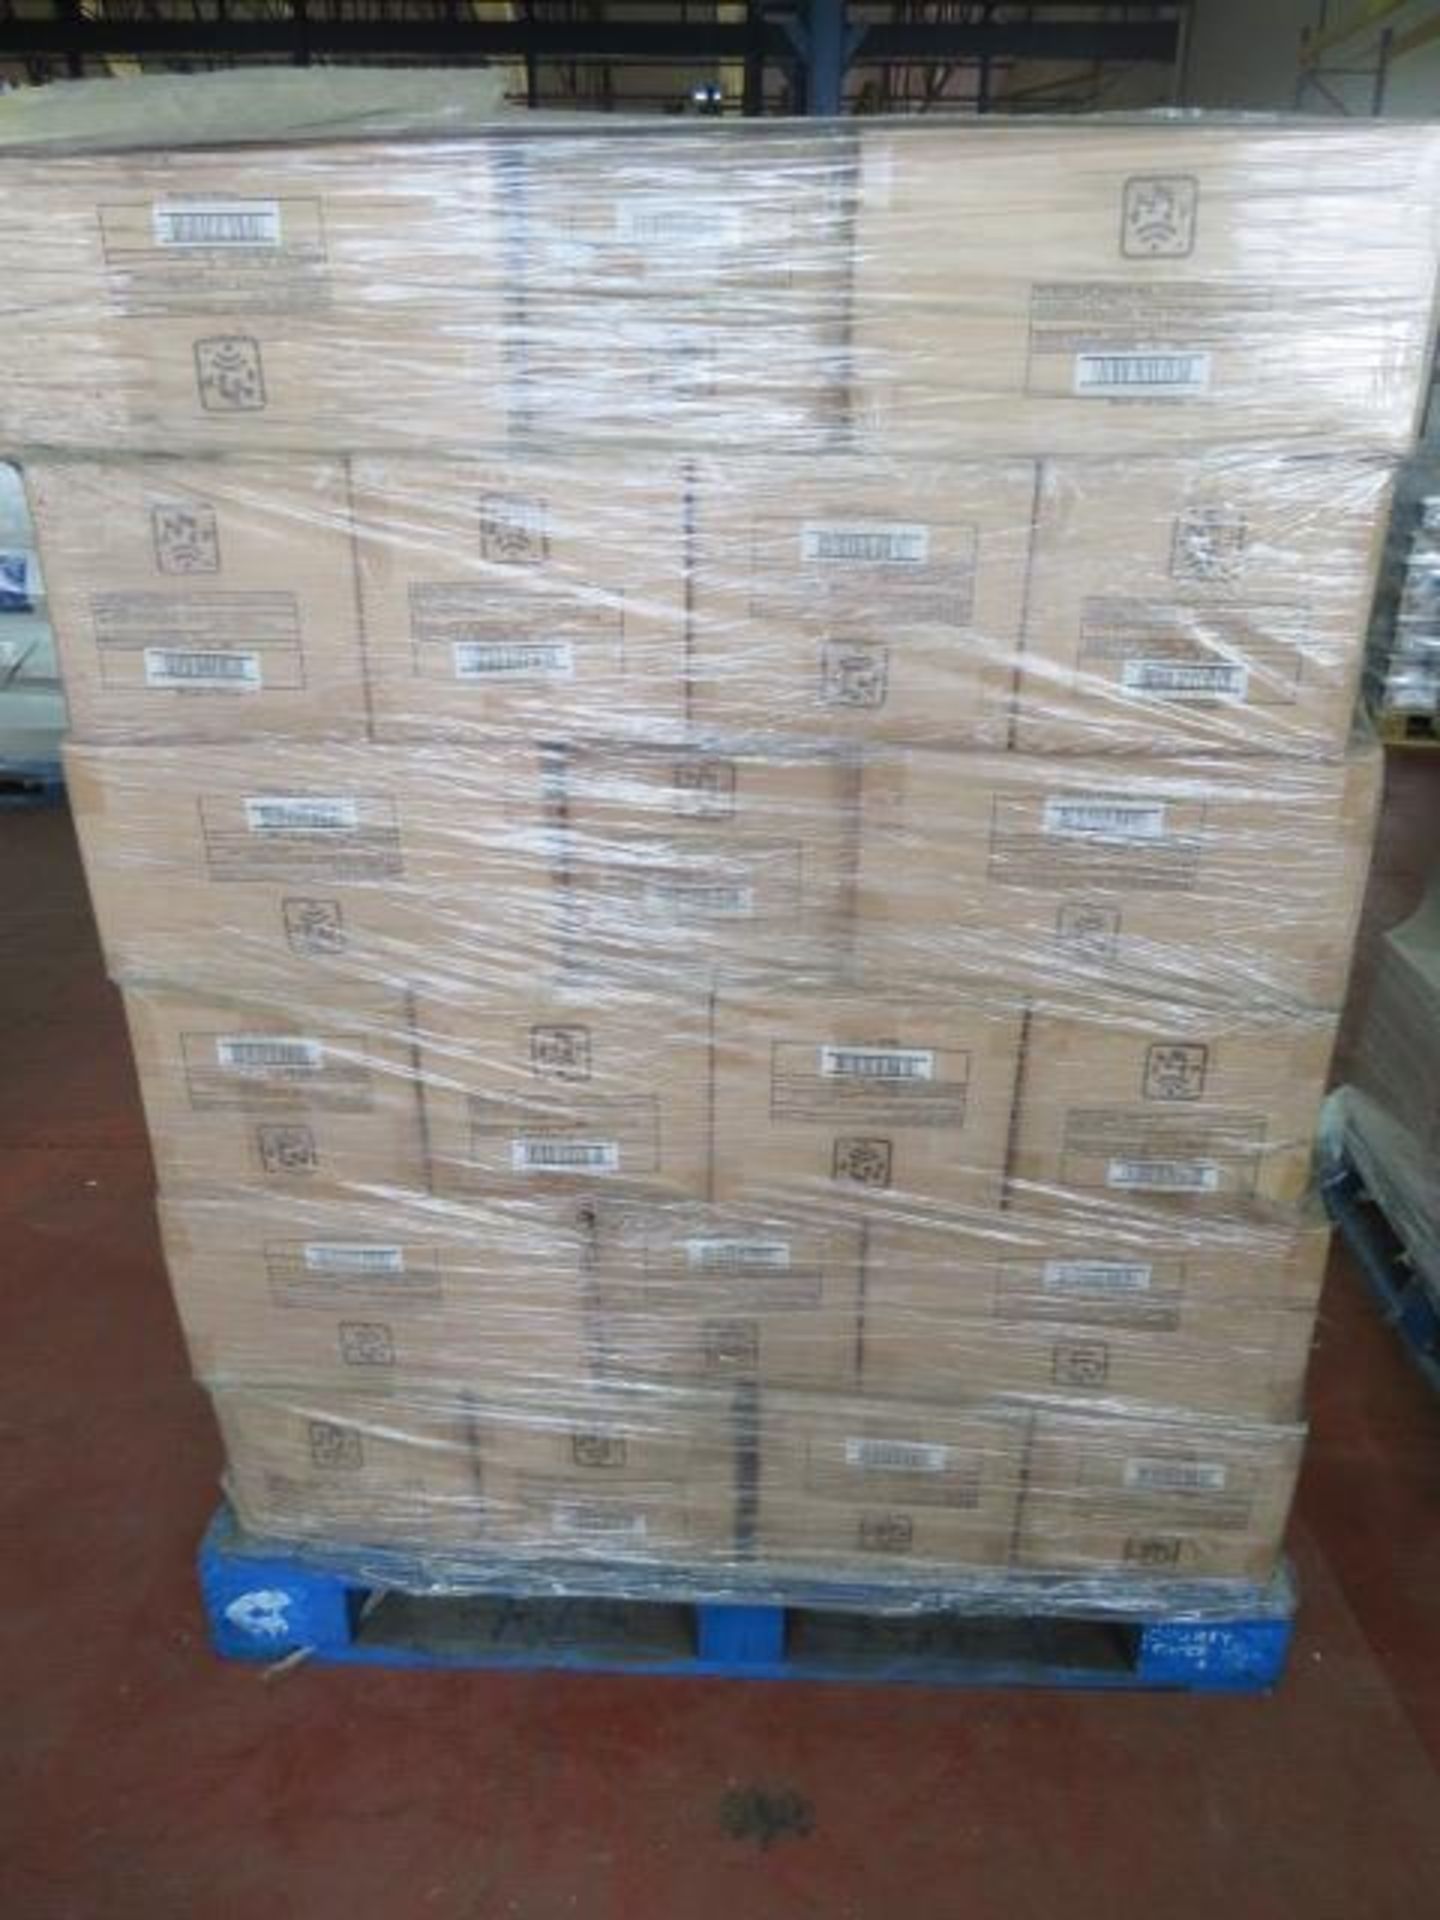 (7) PALLET TO CONTAIN 1,944 x BRAND NEW SIGNALEX IPAD FLEXI CASES. CUSHIONS & PROTECTS, PREVENT... - Image 3 of 3